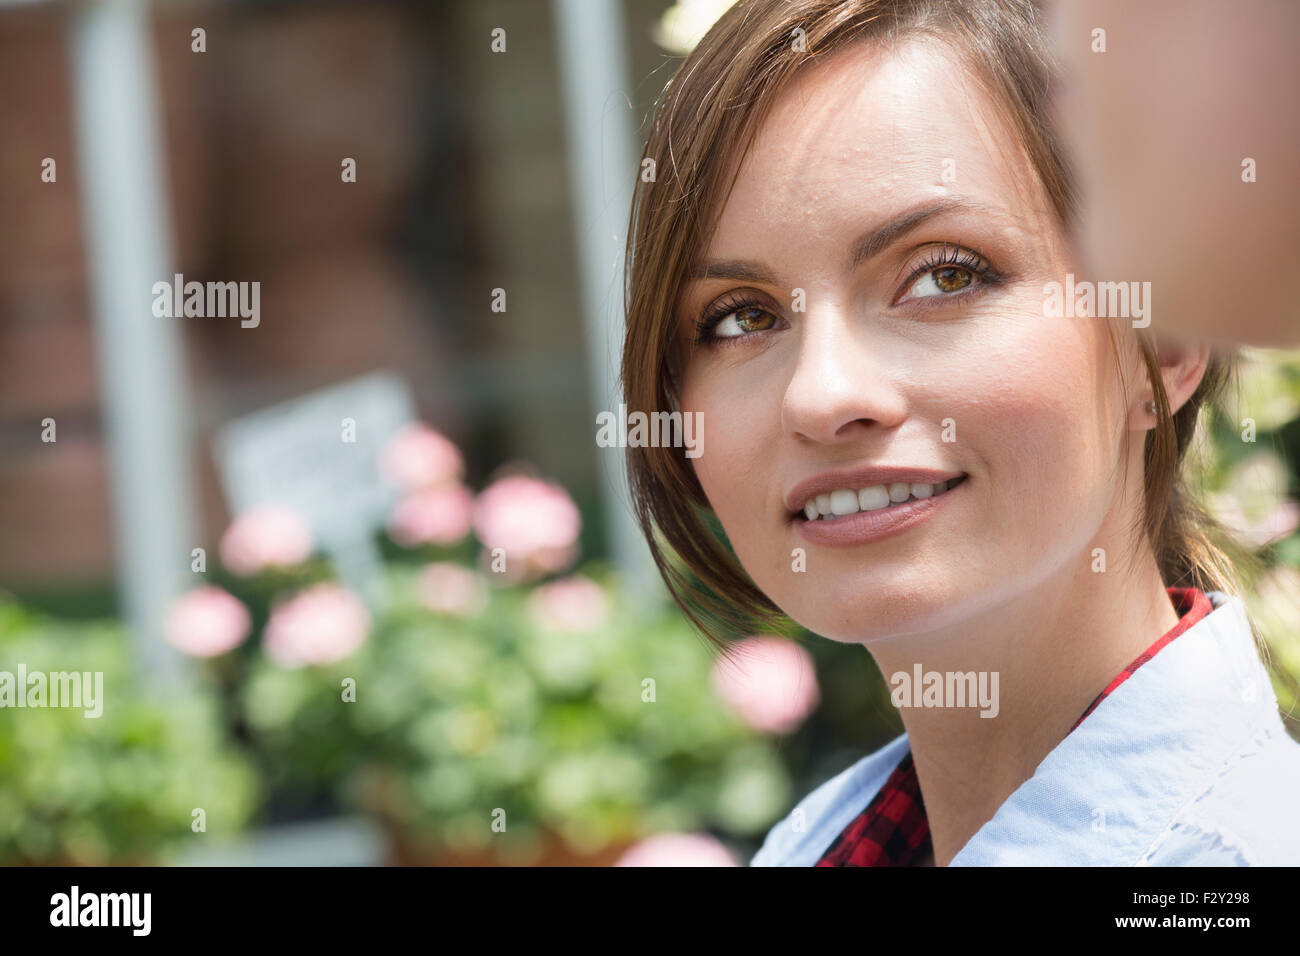 A young woman looking sideways at a companion. Stock Photo